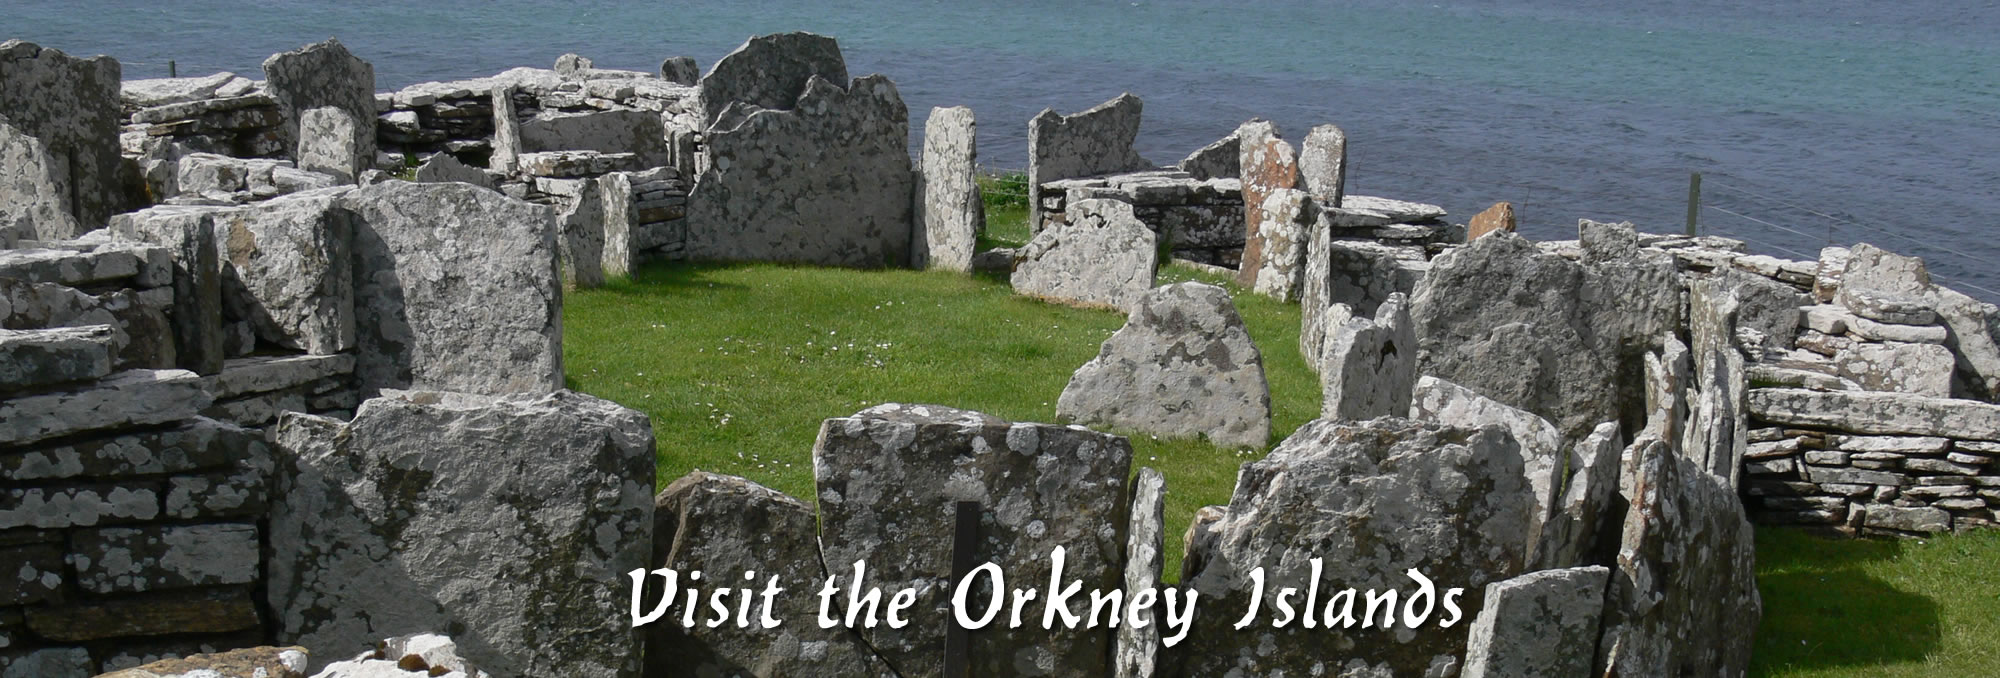 Orkney - picture of the Broch of Gurness in Orkney